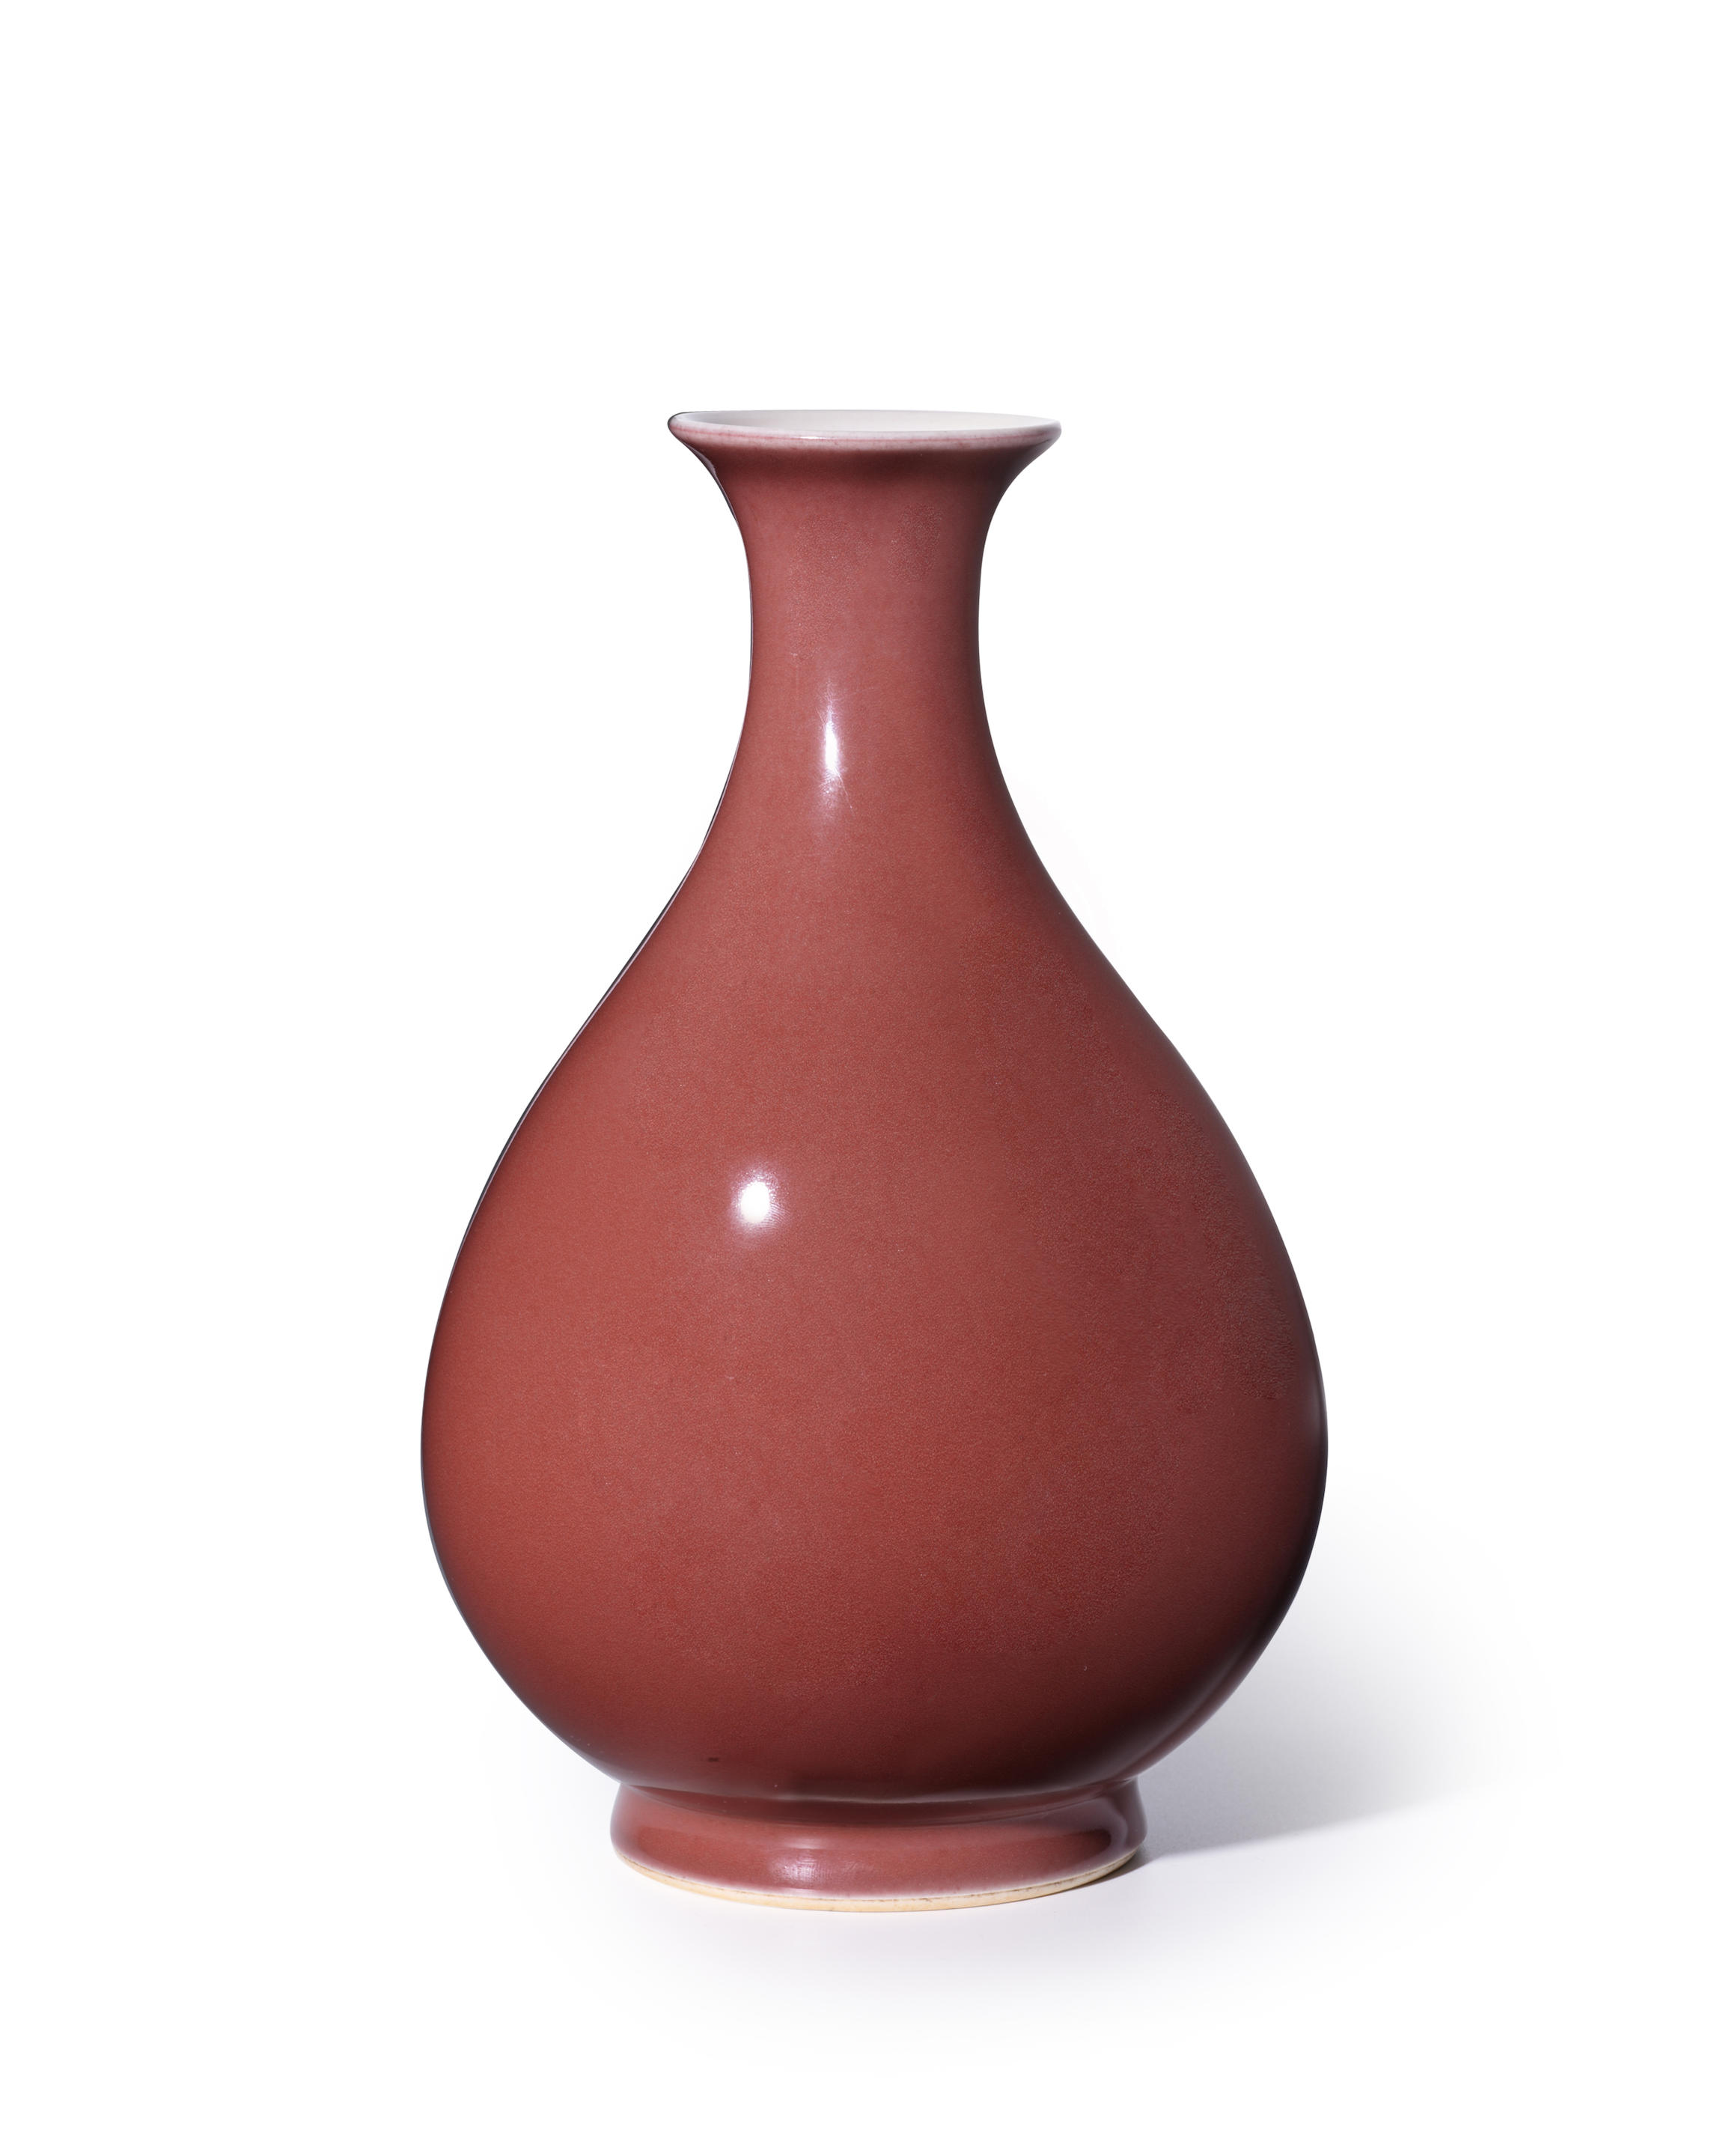 A COPPER-RED-GLAZED PEAR-SHAPED VASE, YUHUCHUNPING